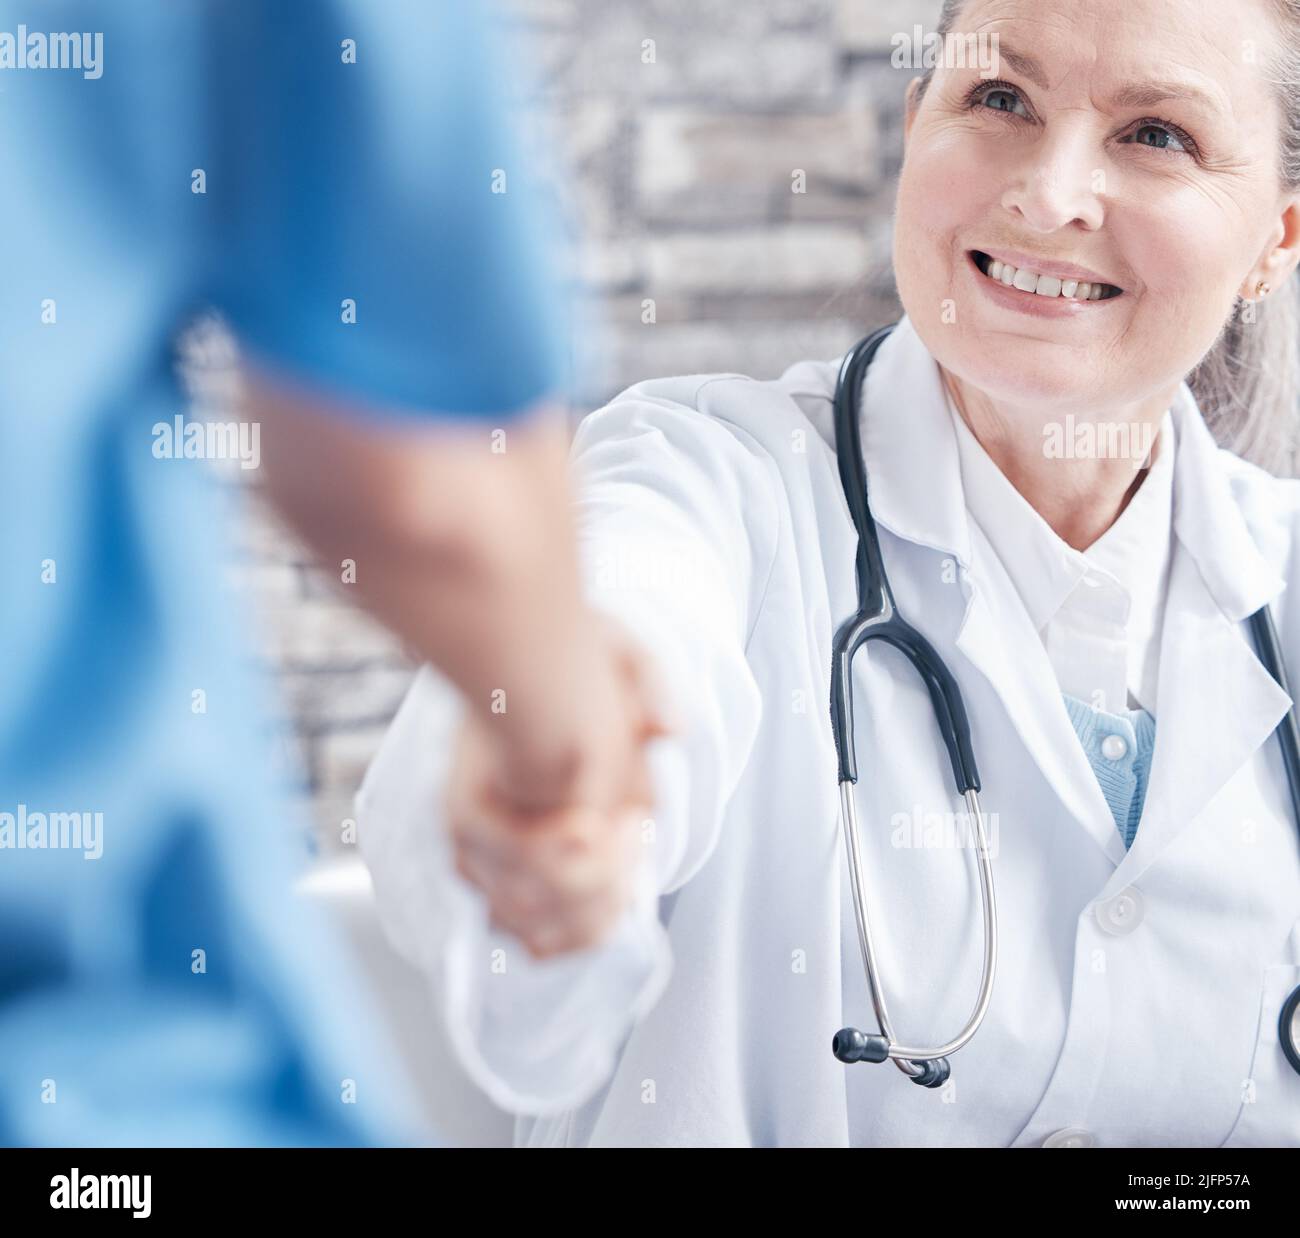 Thank you for assisting me in this medical procedure. Shot of a doctor shaking hands with a colleague in a medical office. Stock Photo